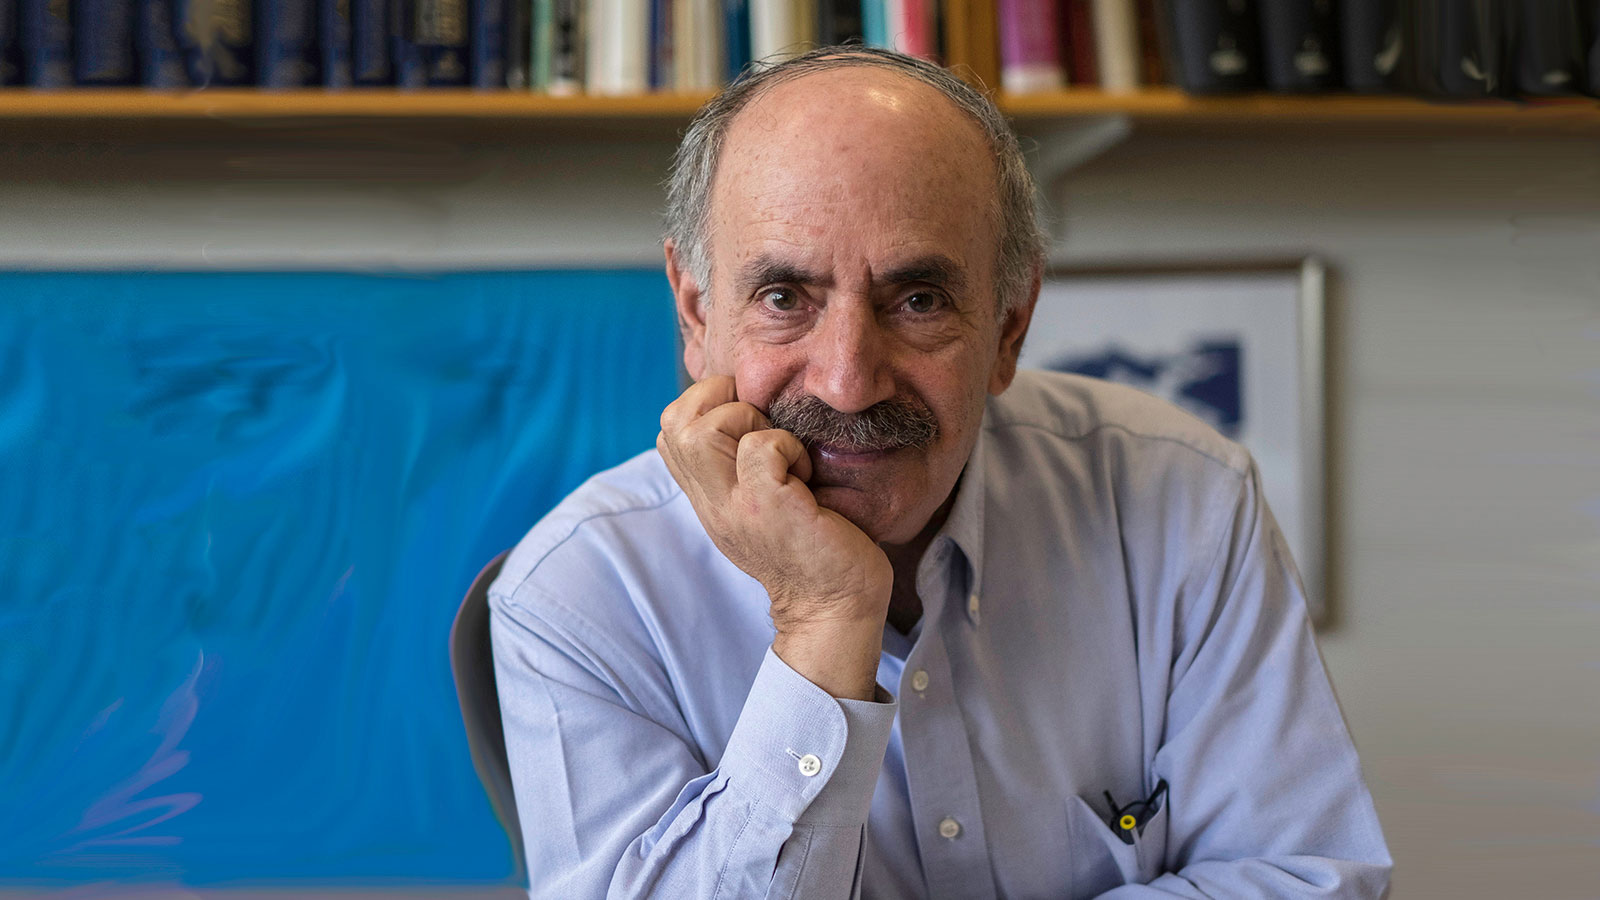 Robert A. Weinberg is the new member of the International Advisory Board